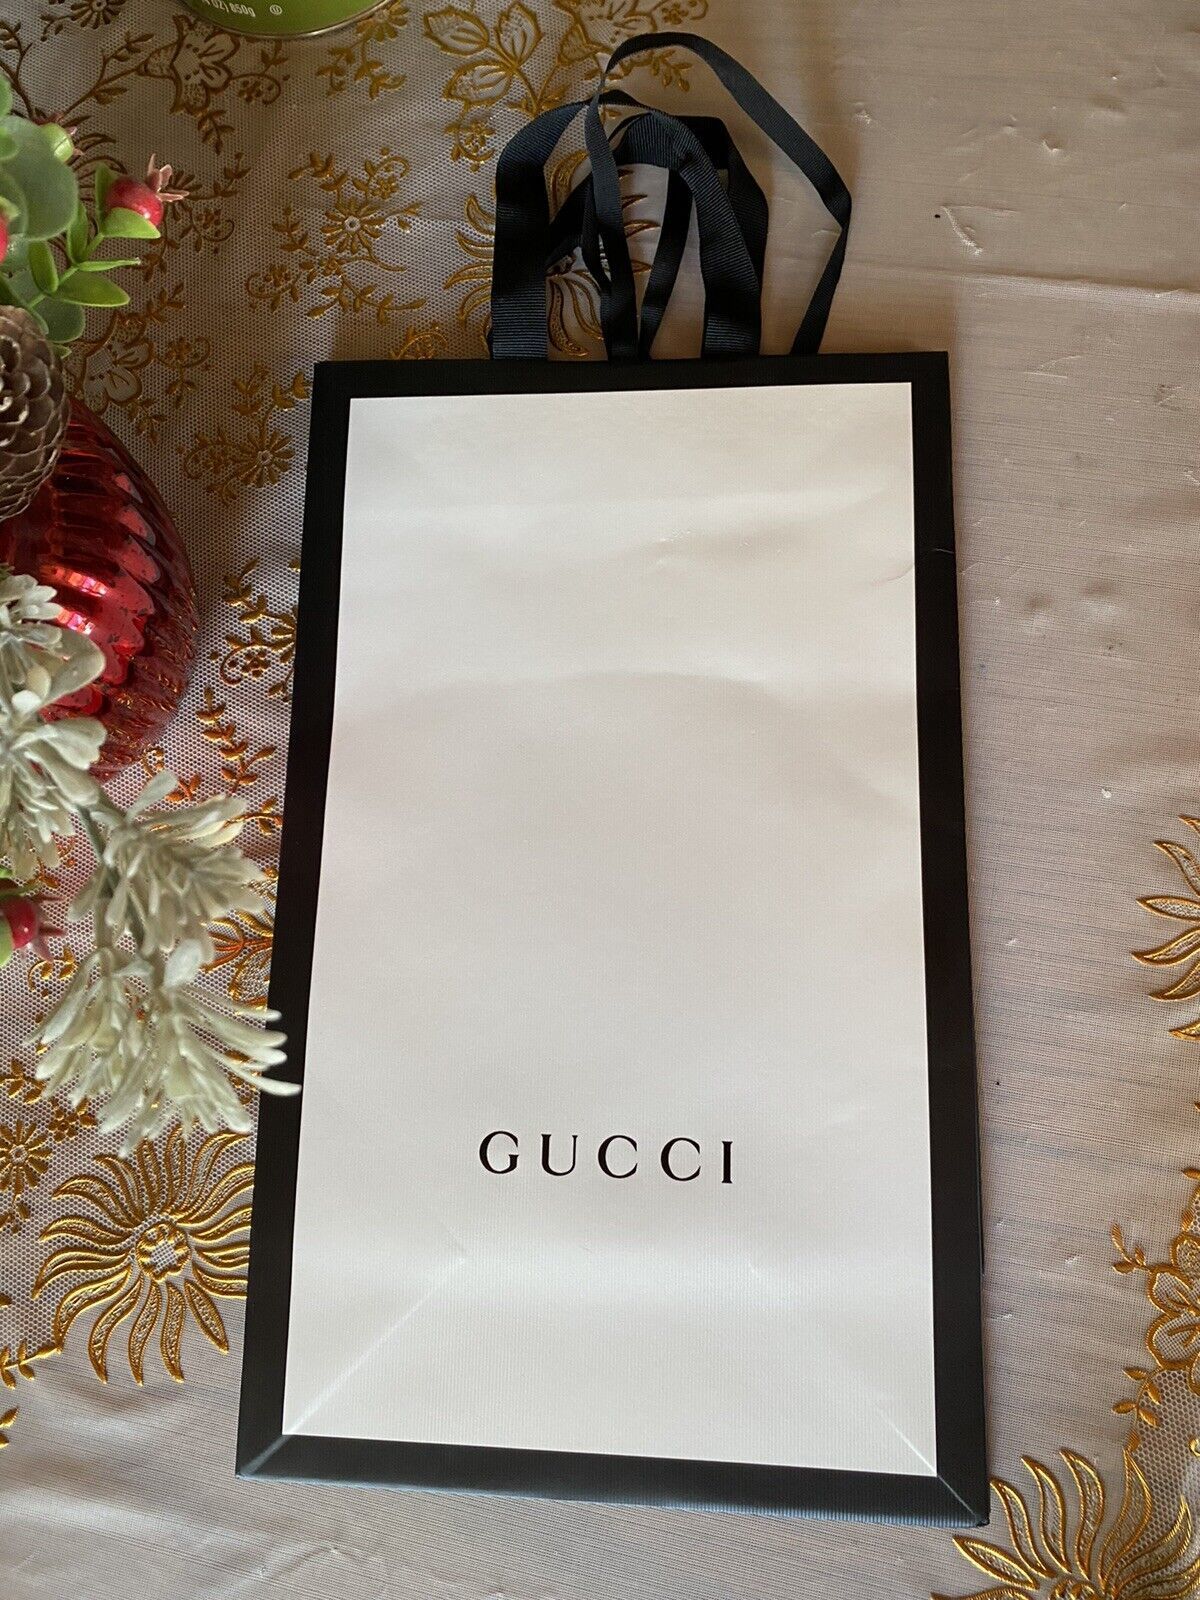 Authentic GUCCI Black and white Paper Shopping Gift Bag 15*9*3.25 - $18.69